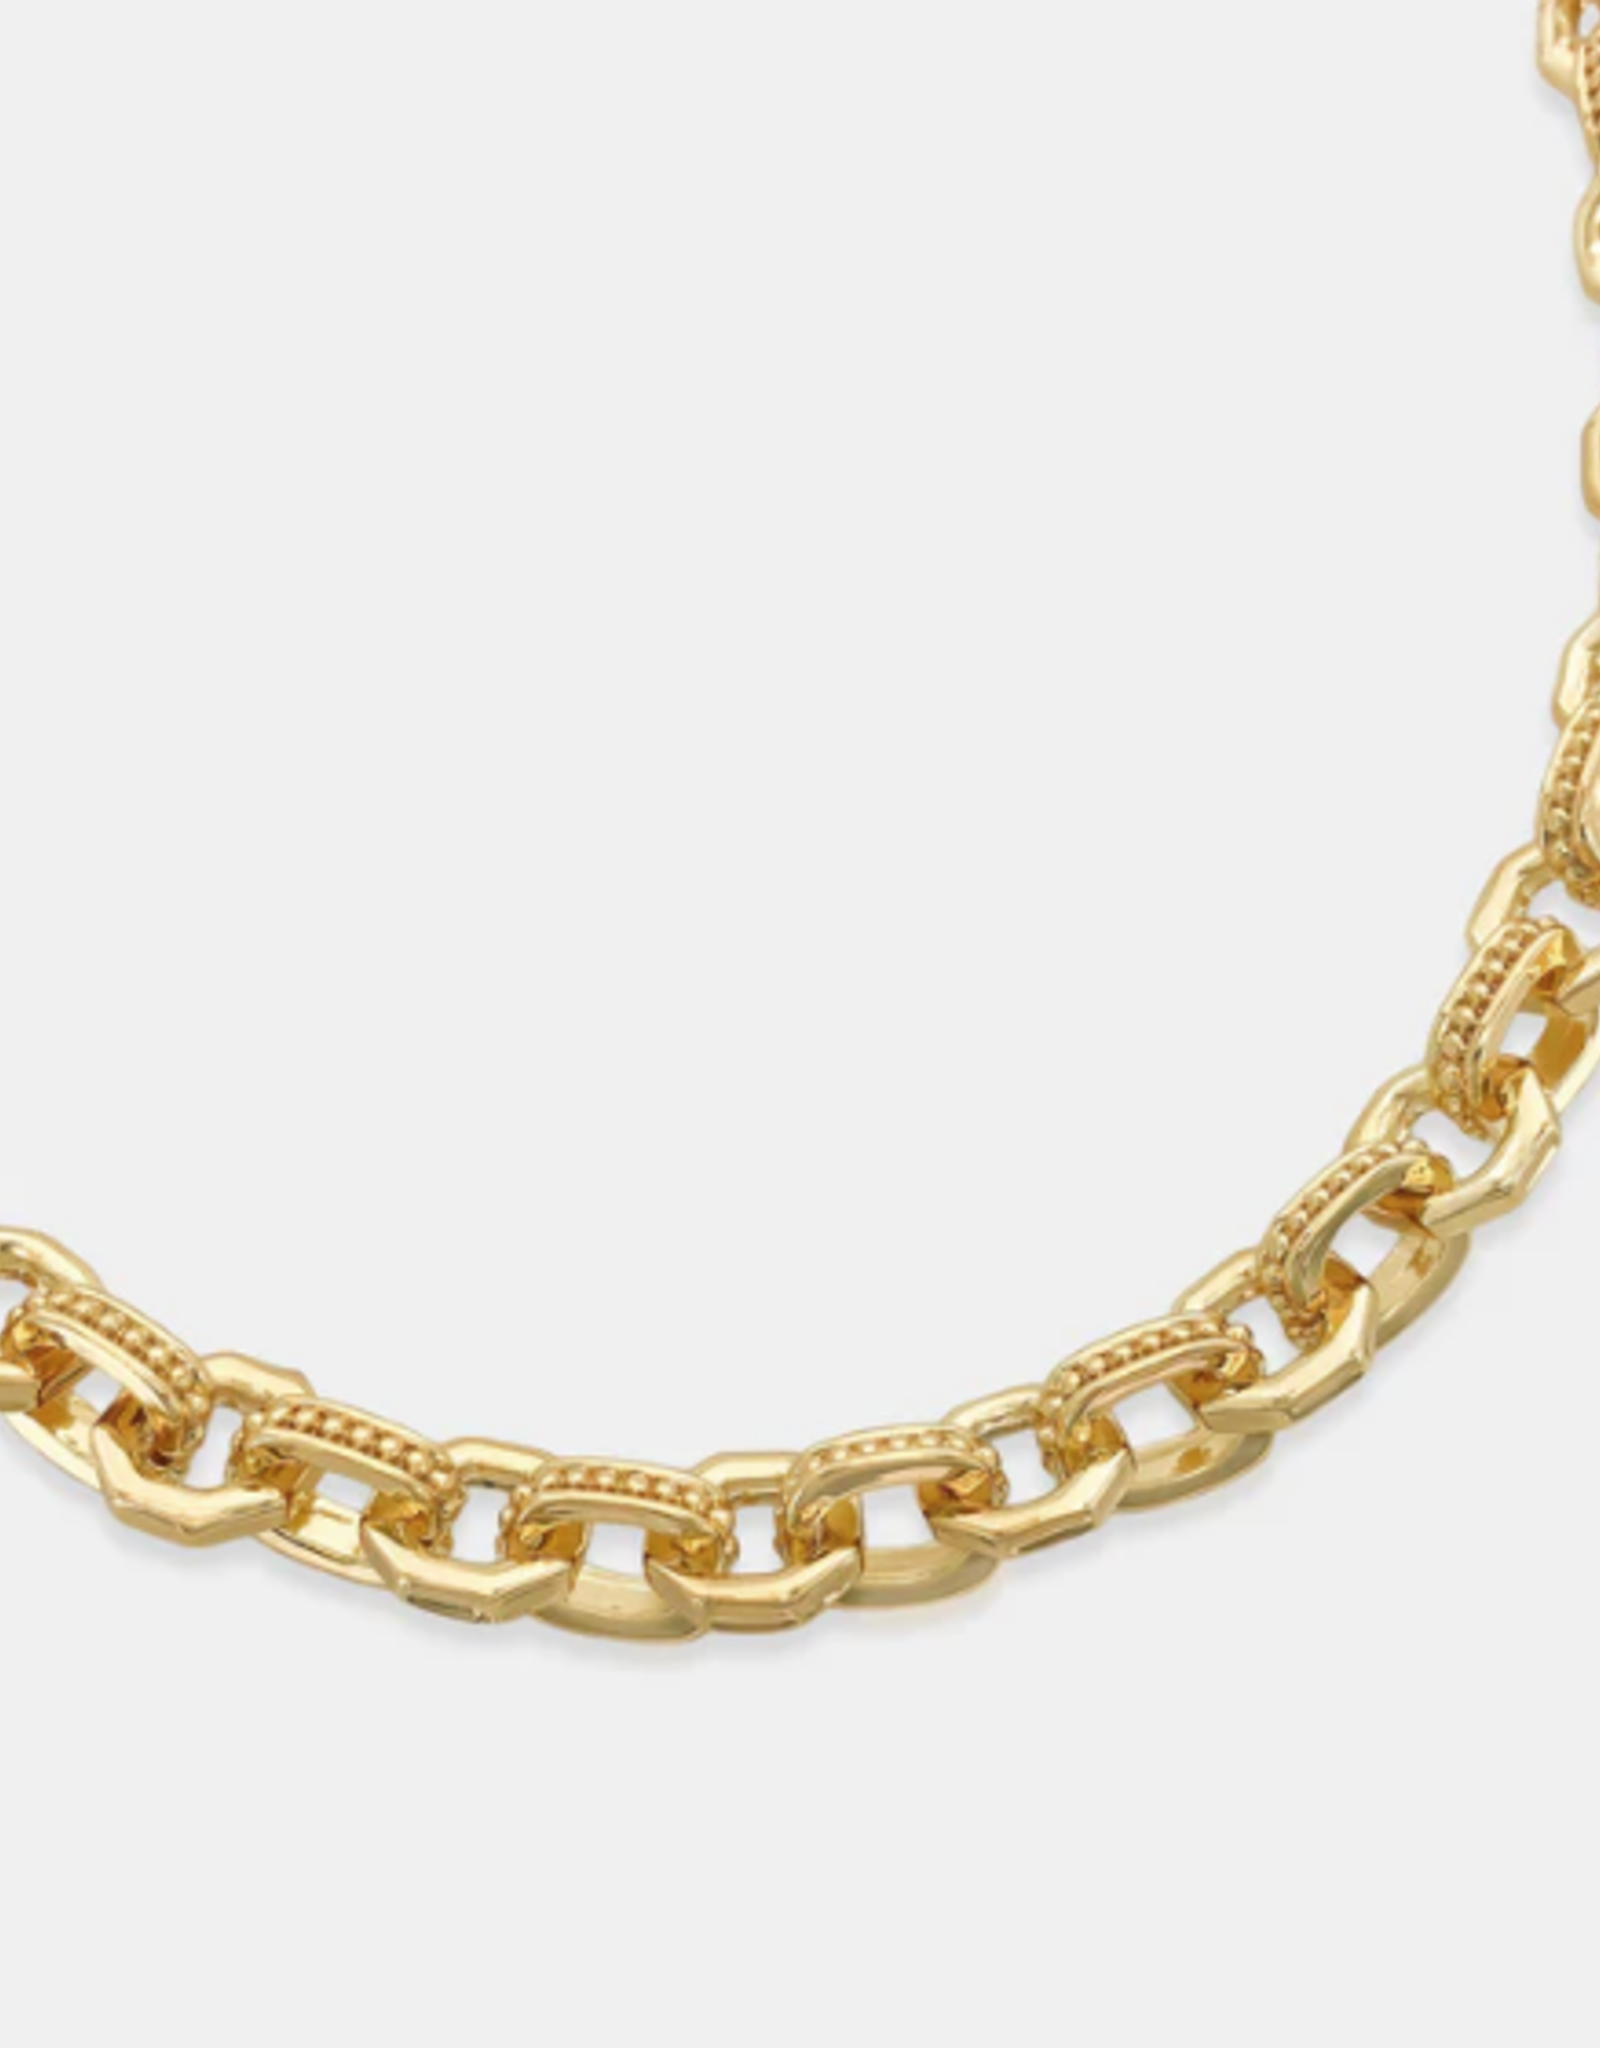 Gold Plated 16" + 2 Hexagon Chain w/Texture Necklace